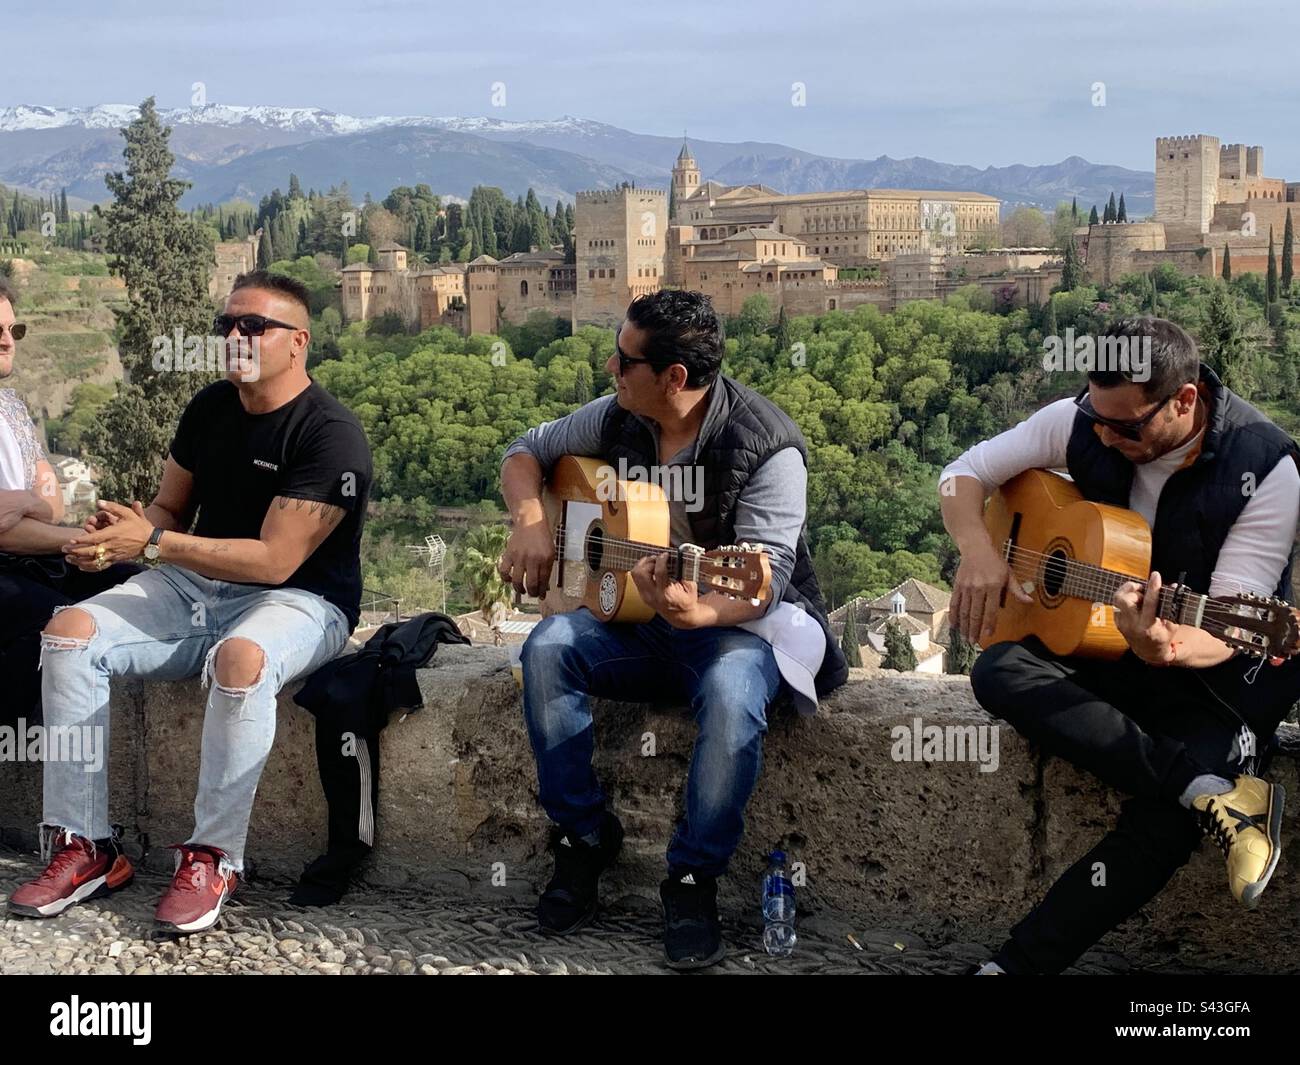 Musicians playing music with Alhambra in the background Stock Photo